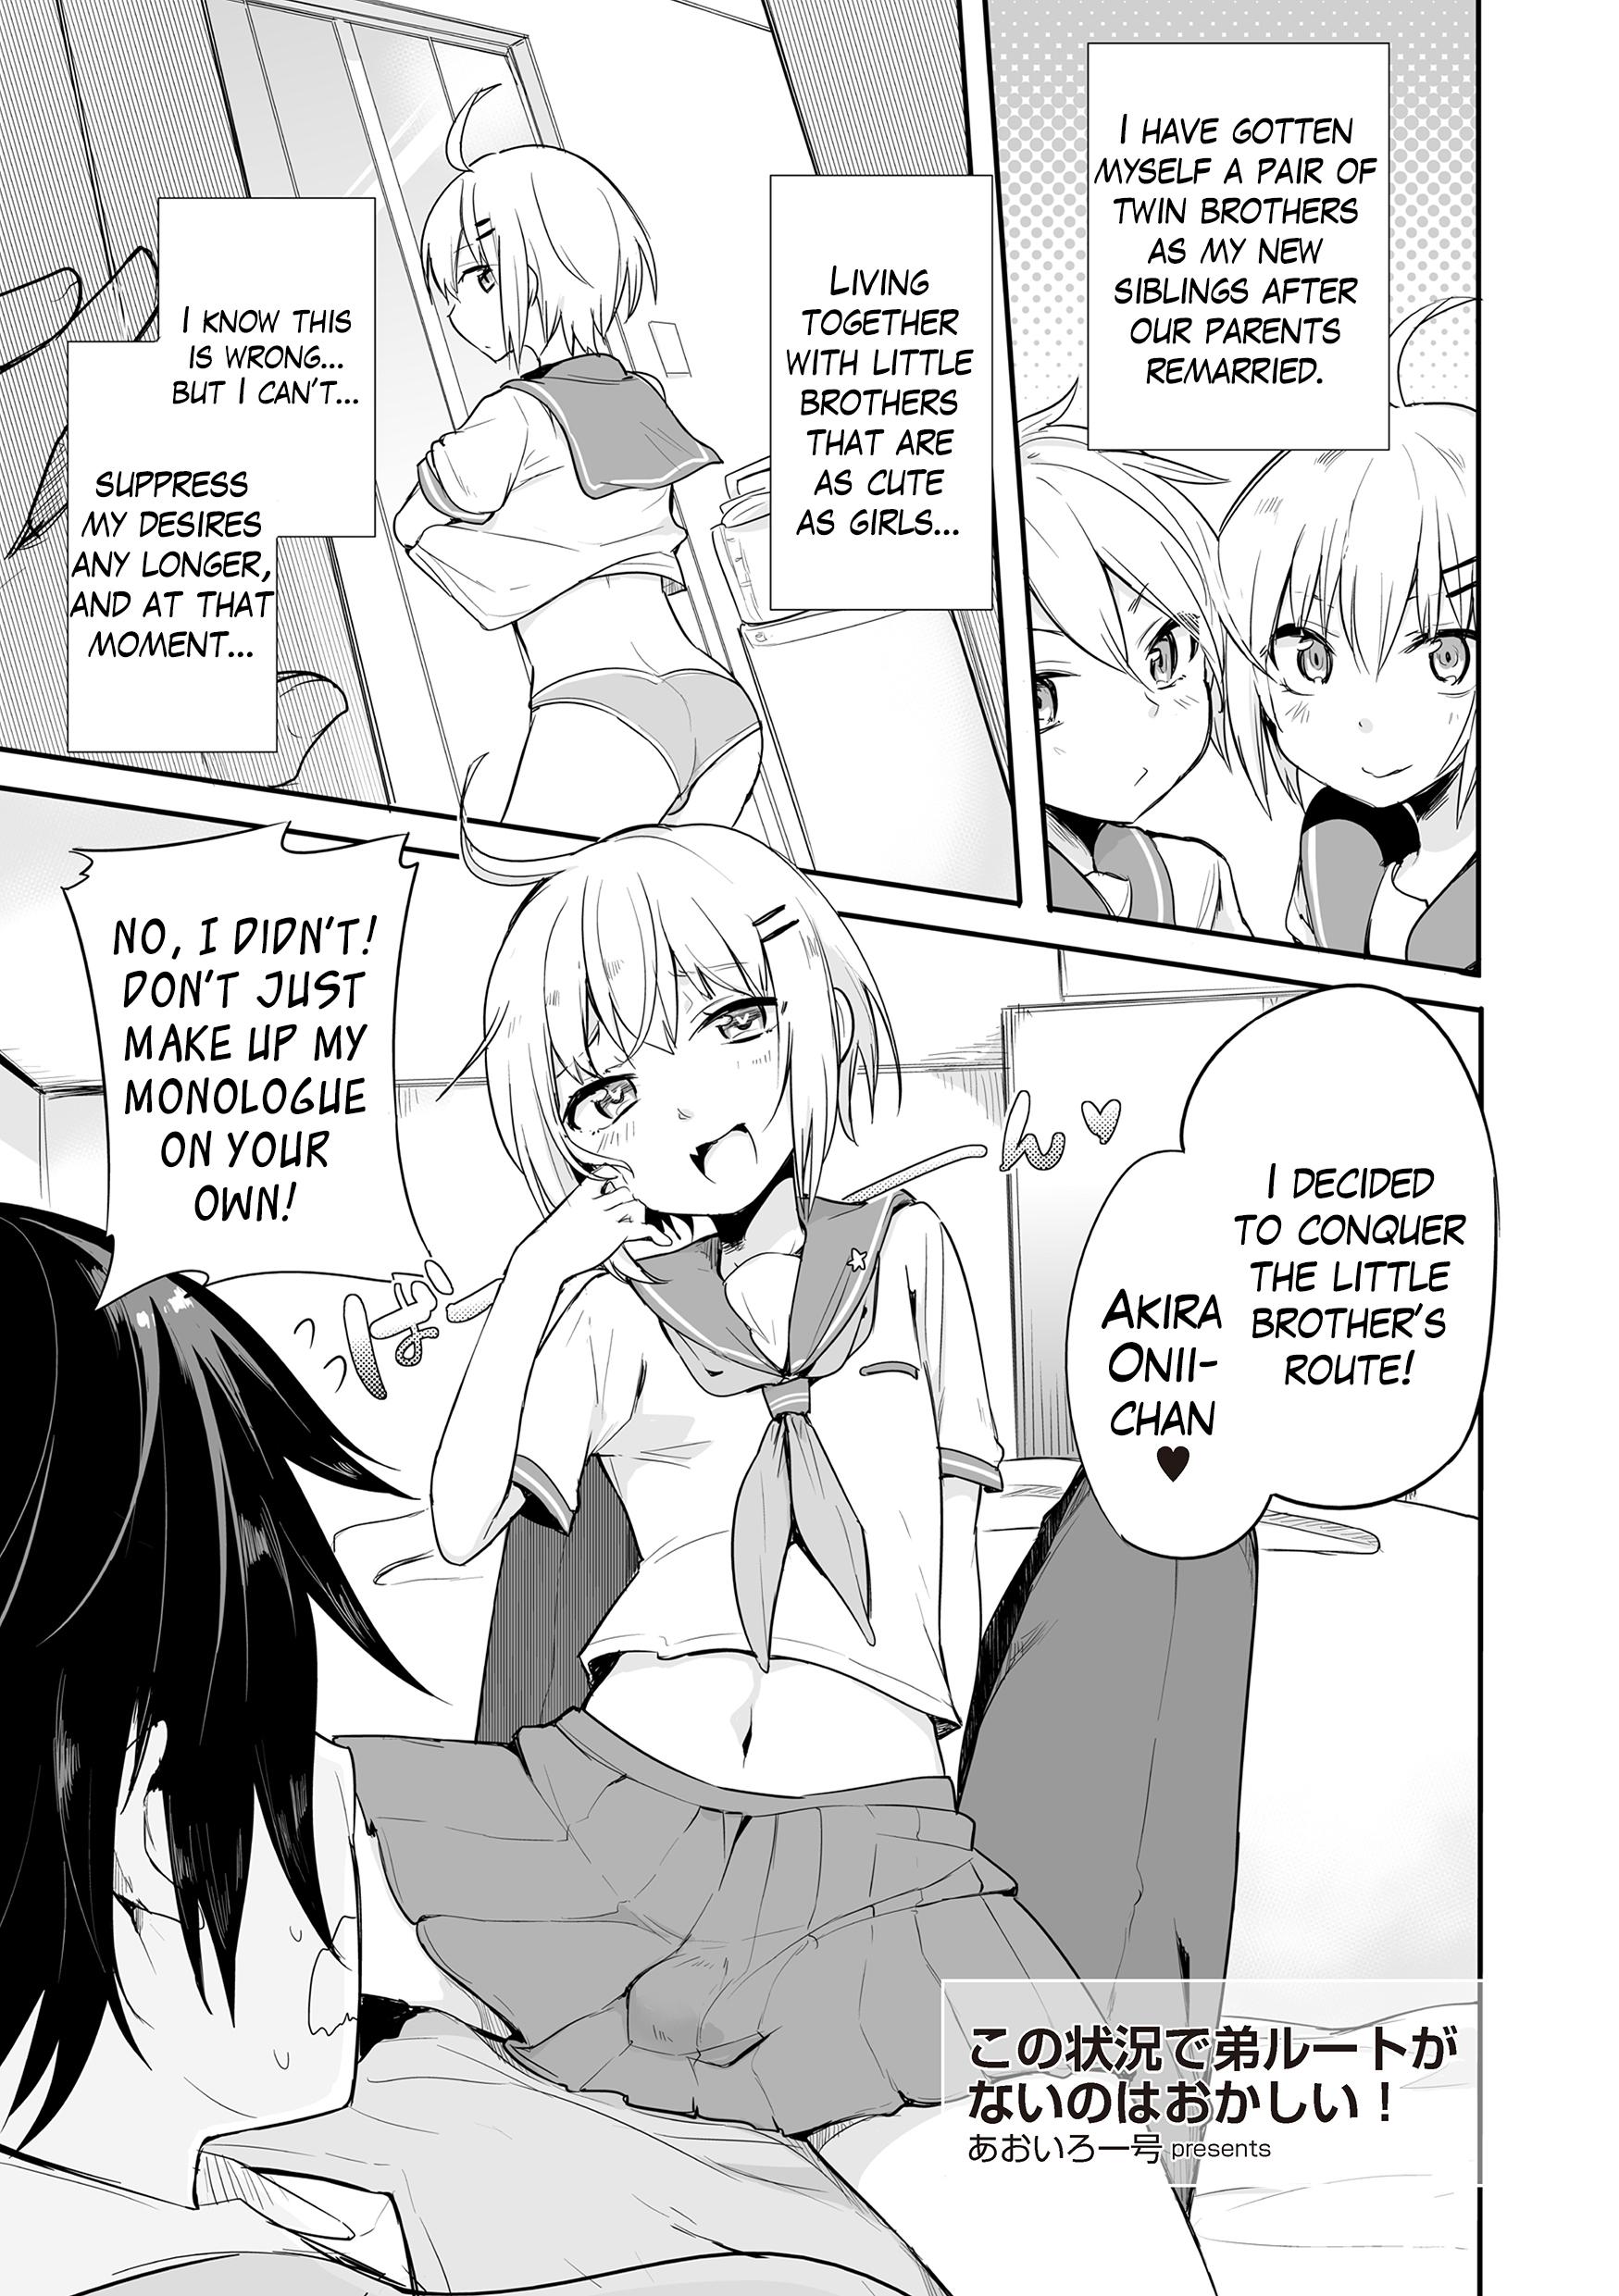 Piercings Kono Joukyou de Otouto Route ga nai no wa Okashii! | This Situation is too Weird for it not to be a Little Brother’s Route! Hairy Sexy - Page 2